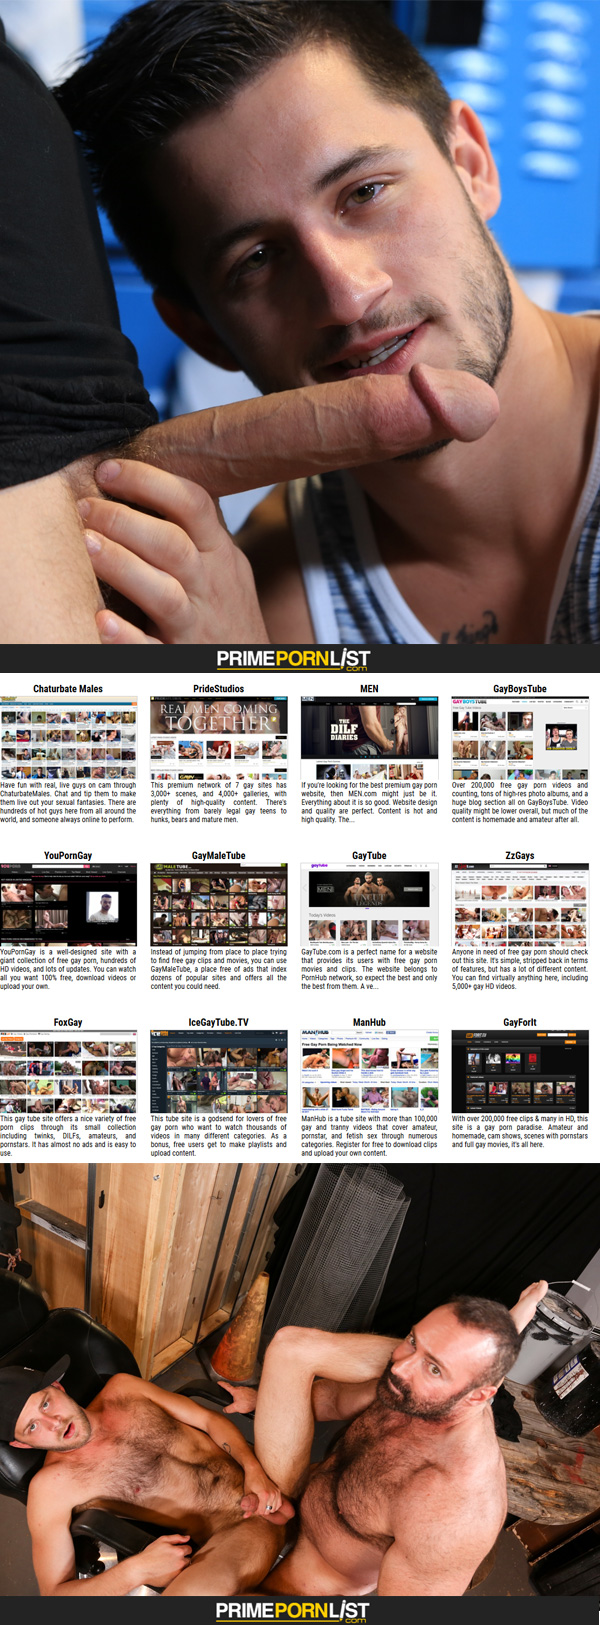 Prime Porn List - Your Favorites Sites Ranked and Categorized pic